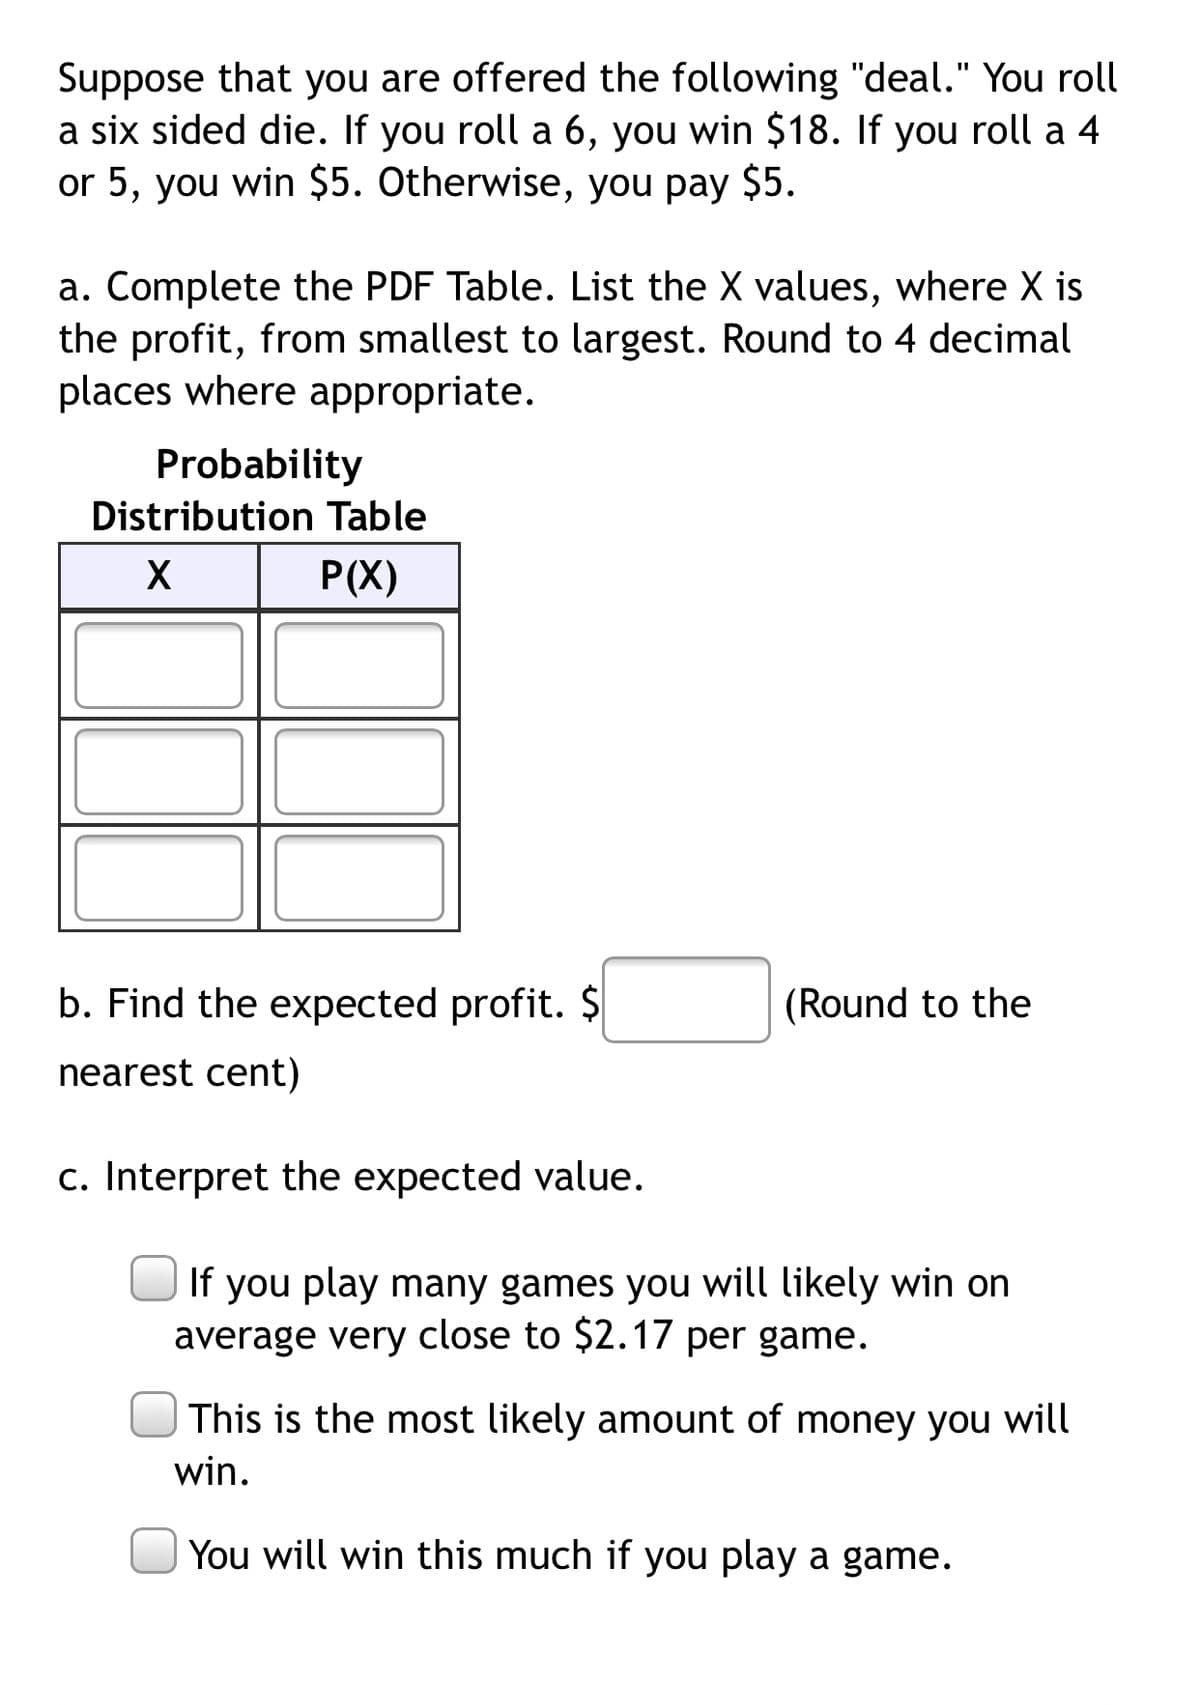 Suppose that you are offered the following "deal." You roll
a six sided die. If you roll a 6, you win $18. If you roll a 4
or 5, you win $5. Otherwise, you pay $5.
a. Complete the PDF Table. List the X values, where X is
the profit, from smallest to largest. Round to 4 decimal
places where appropriate.
Probability
Distribution Table
P(X)
b. Find the expected profit. $
(Round to the
nearest cent)
c. Interpret the expected value.
If you play many games you will likely win on
average very close to $2.17 per game.
This is the most likely amount of money you will
win.
You will win this much if you play a game.
